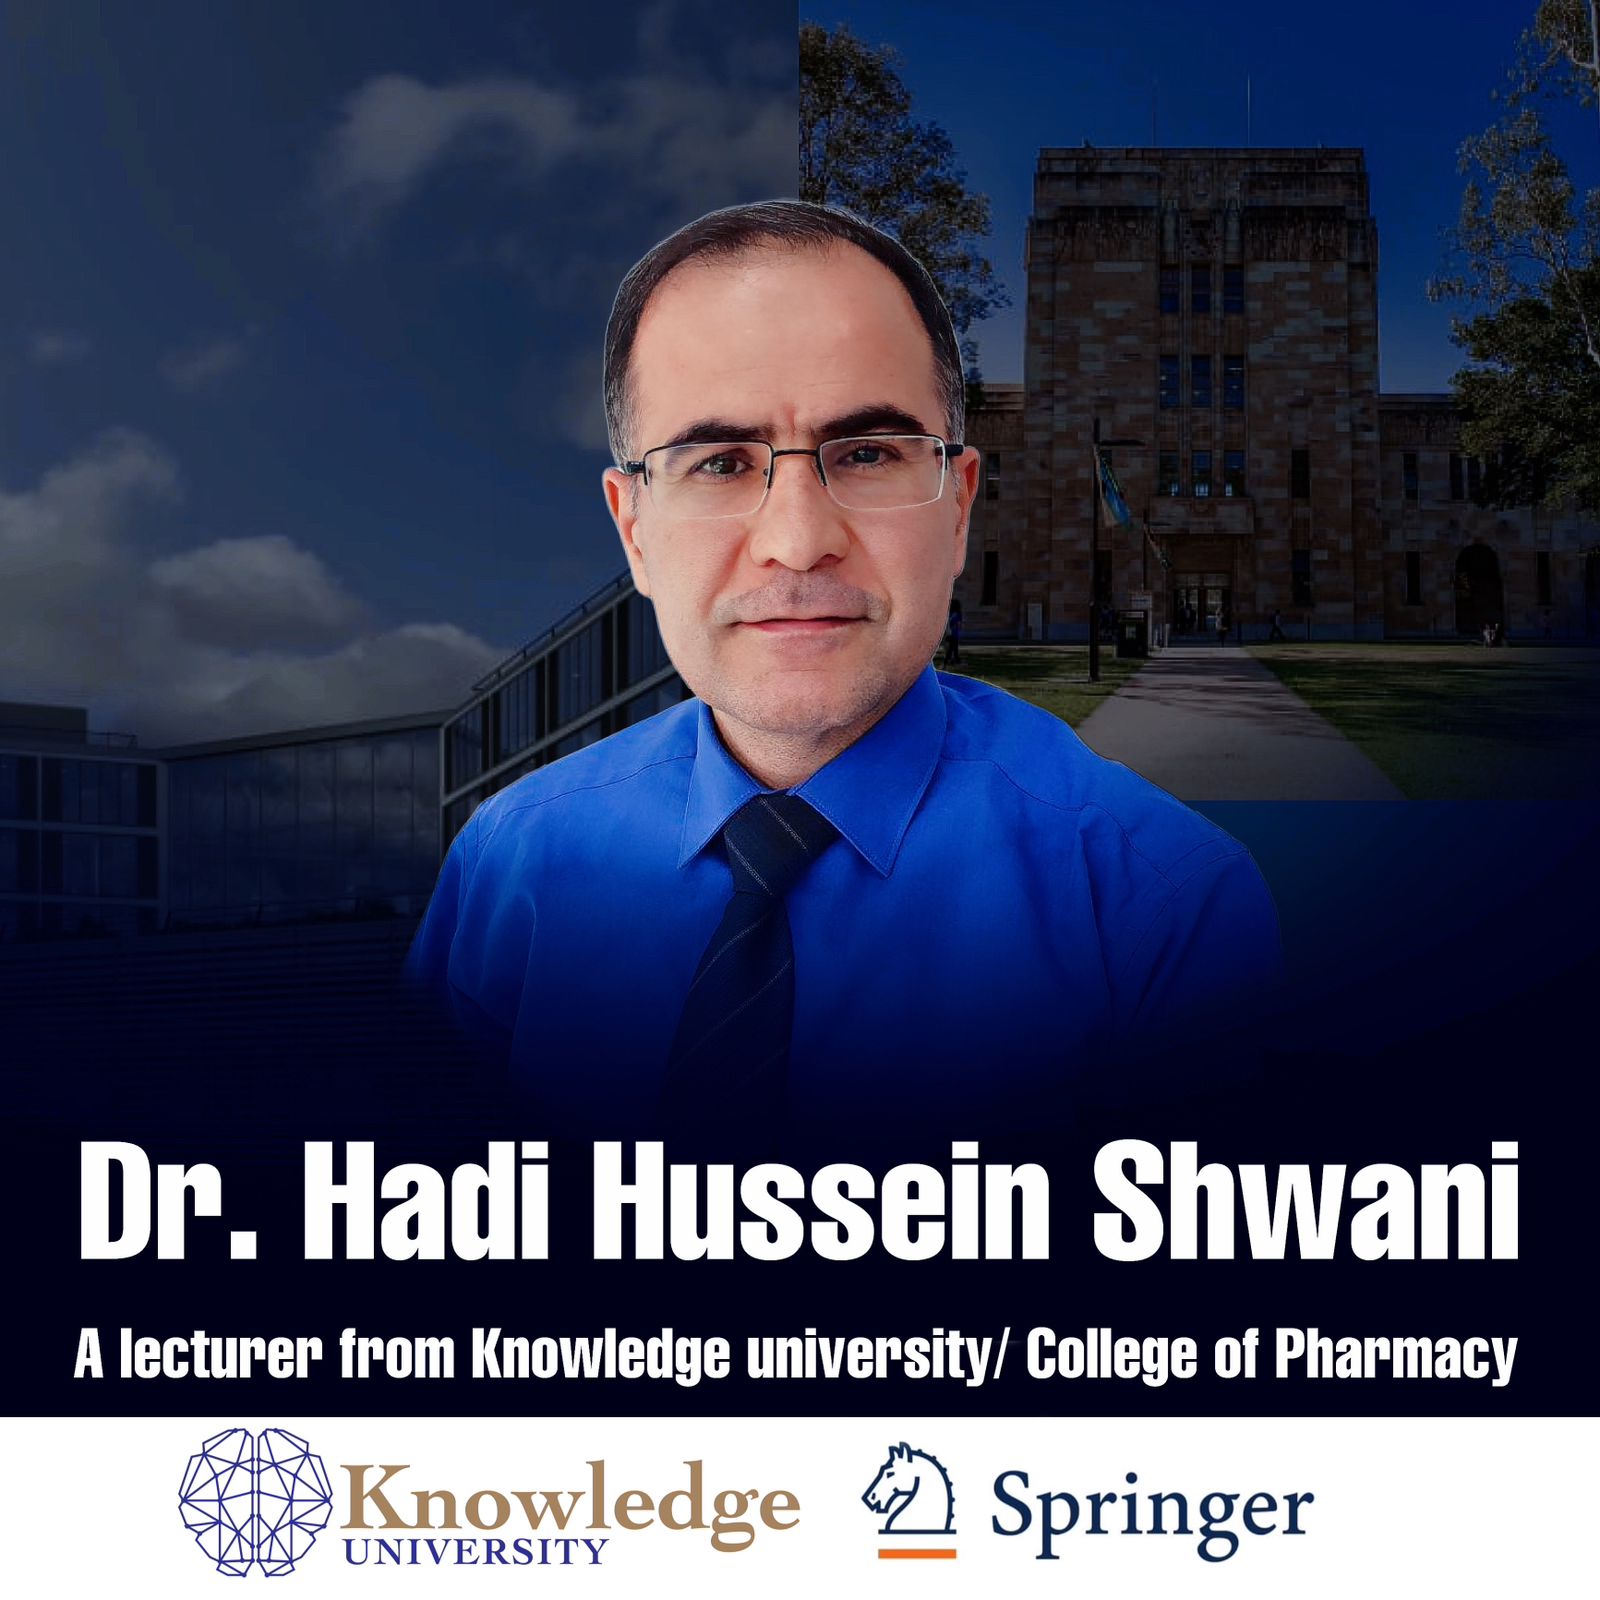 Dr. Hadi Hussein Shwani published a research article 